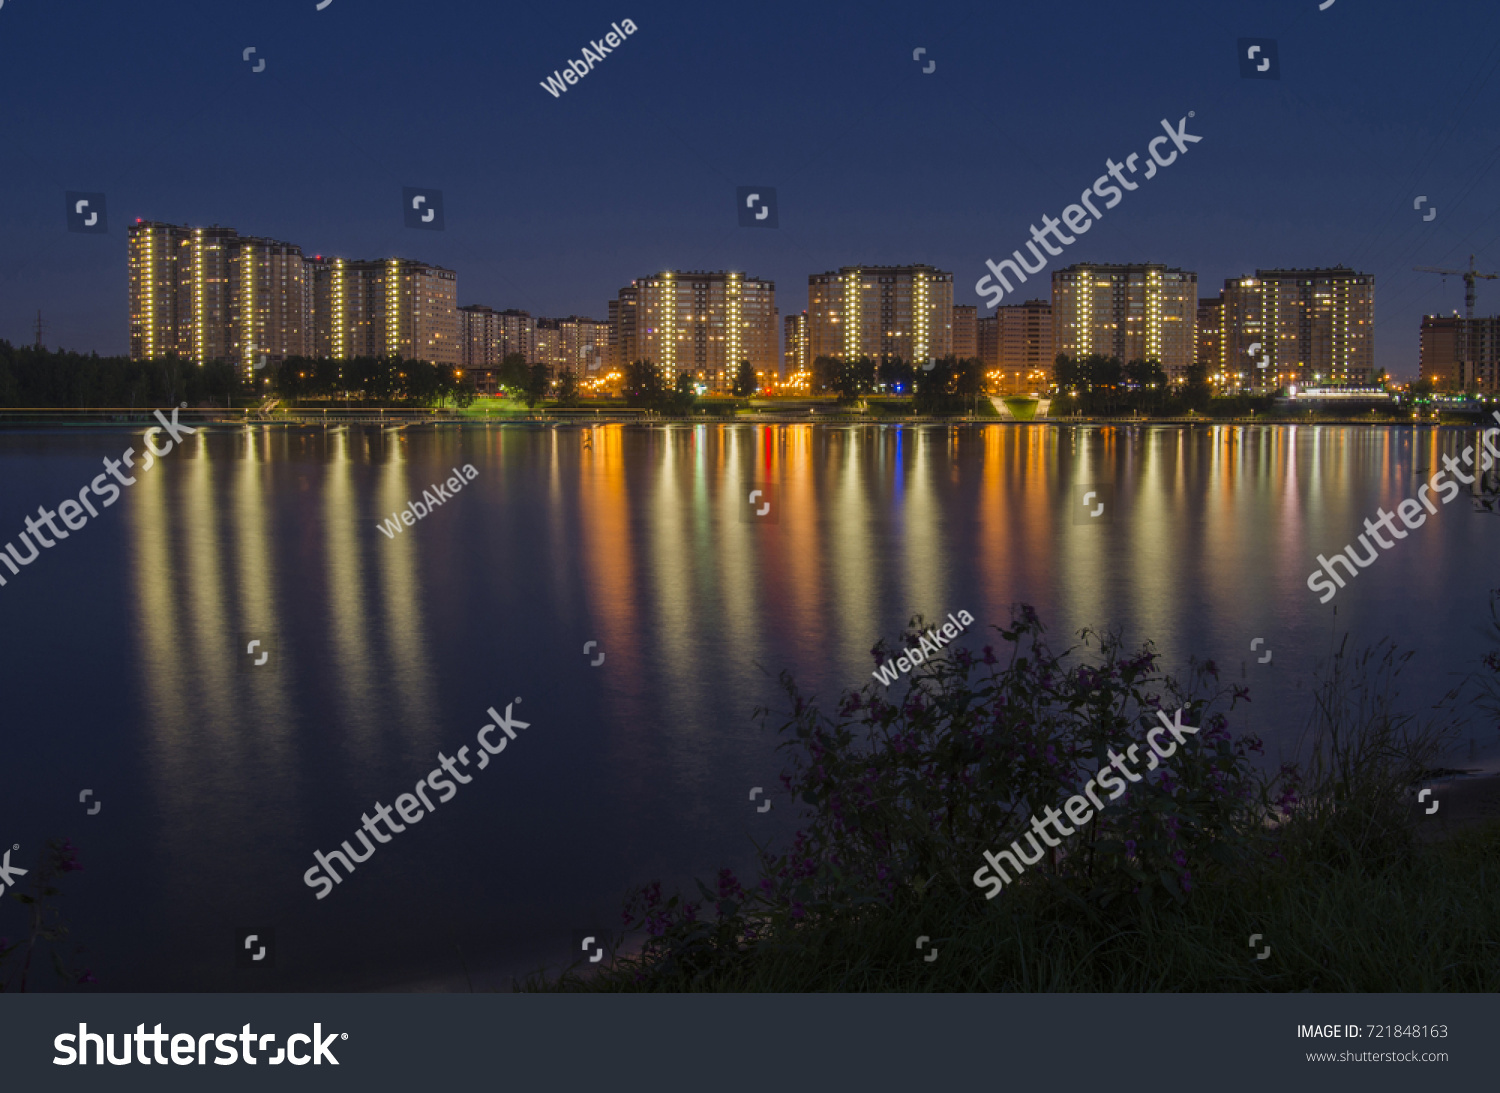 Residential complex of skyscrapers and the waterfront across the river reflected in the water. Night cityscape #721848163